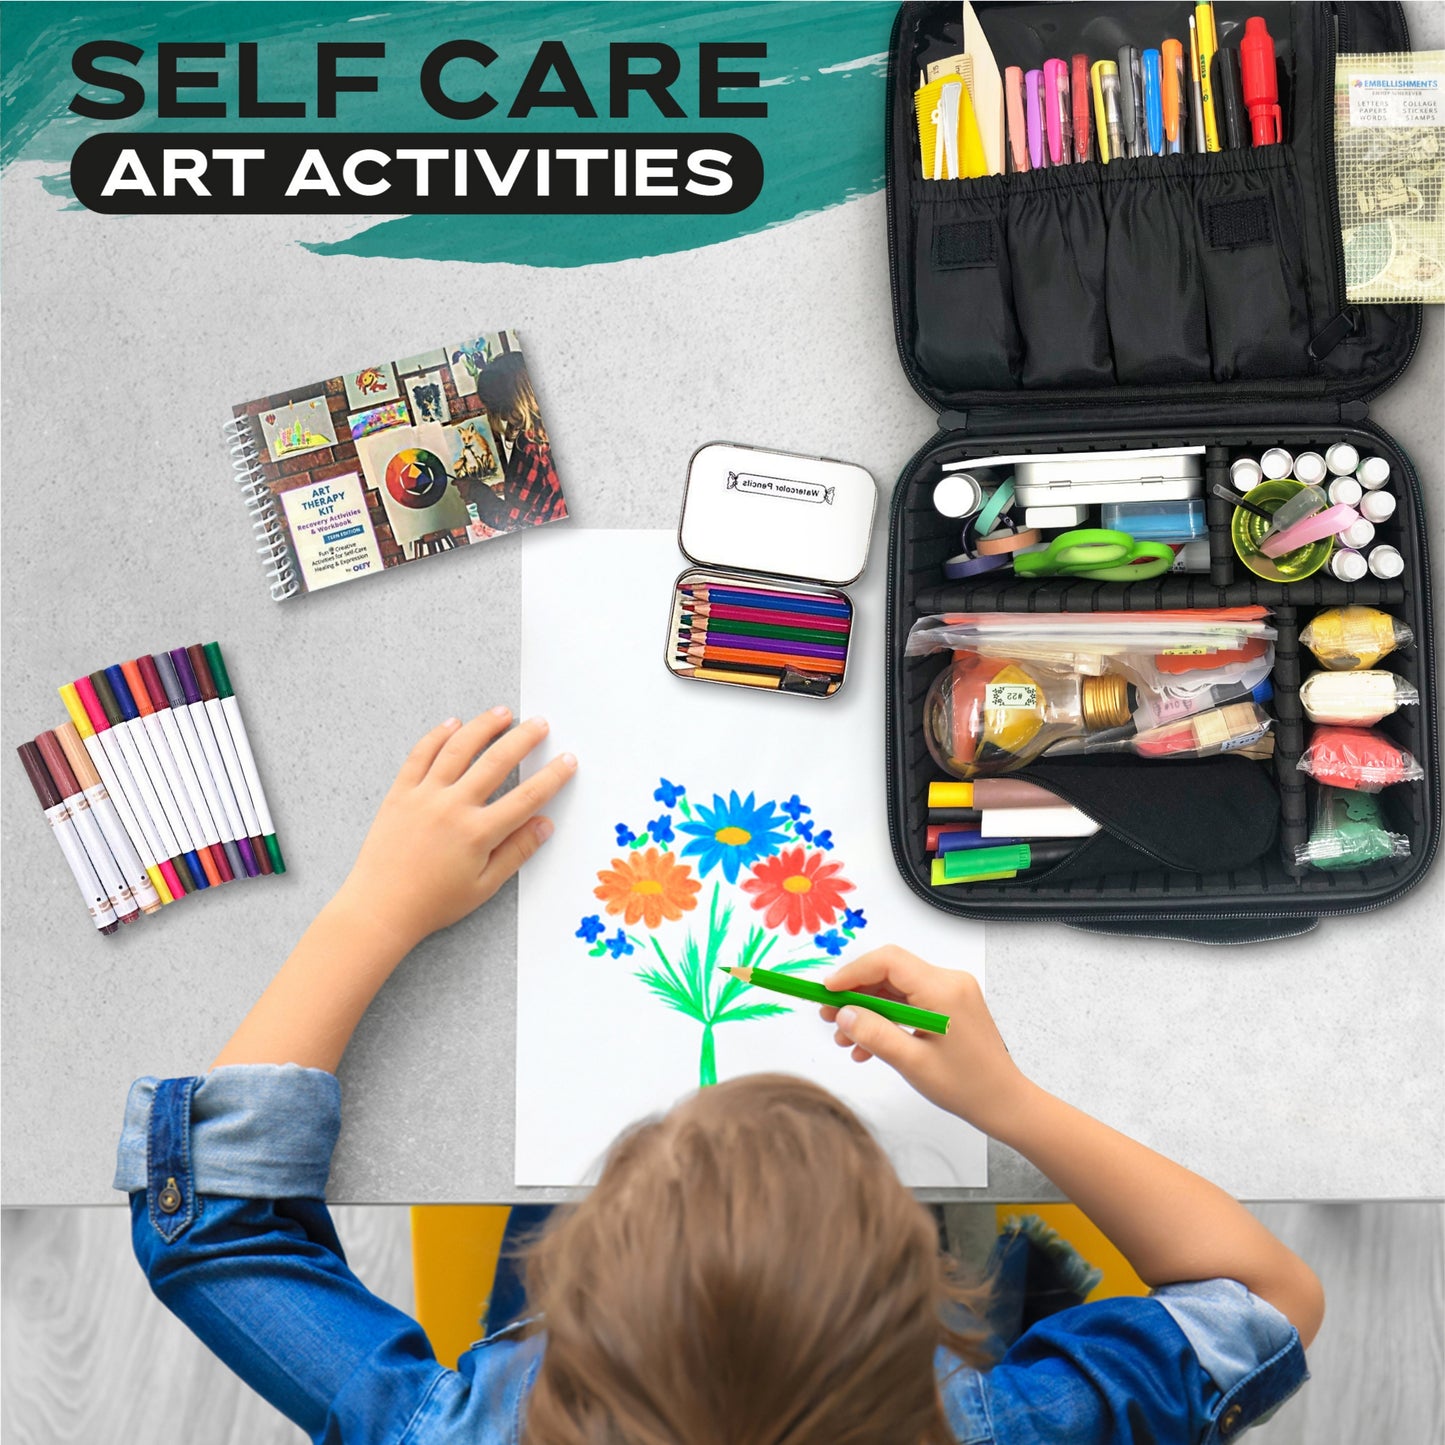 Art Therapy Activities Kit: 20+ Alternative Art Projects to Soothe Anxiety Coping Skills, Satisfying Art Therapy Activities, 175+ Art Supplies & Embellishments, Therapist Tools for Mental Health & Wellness (Pink Case)